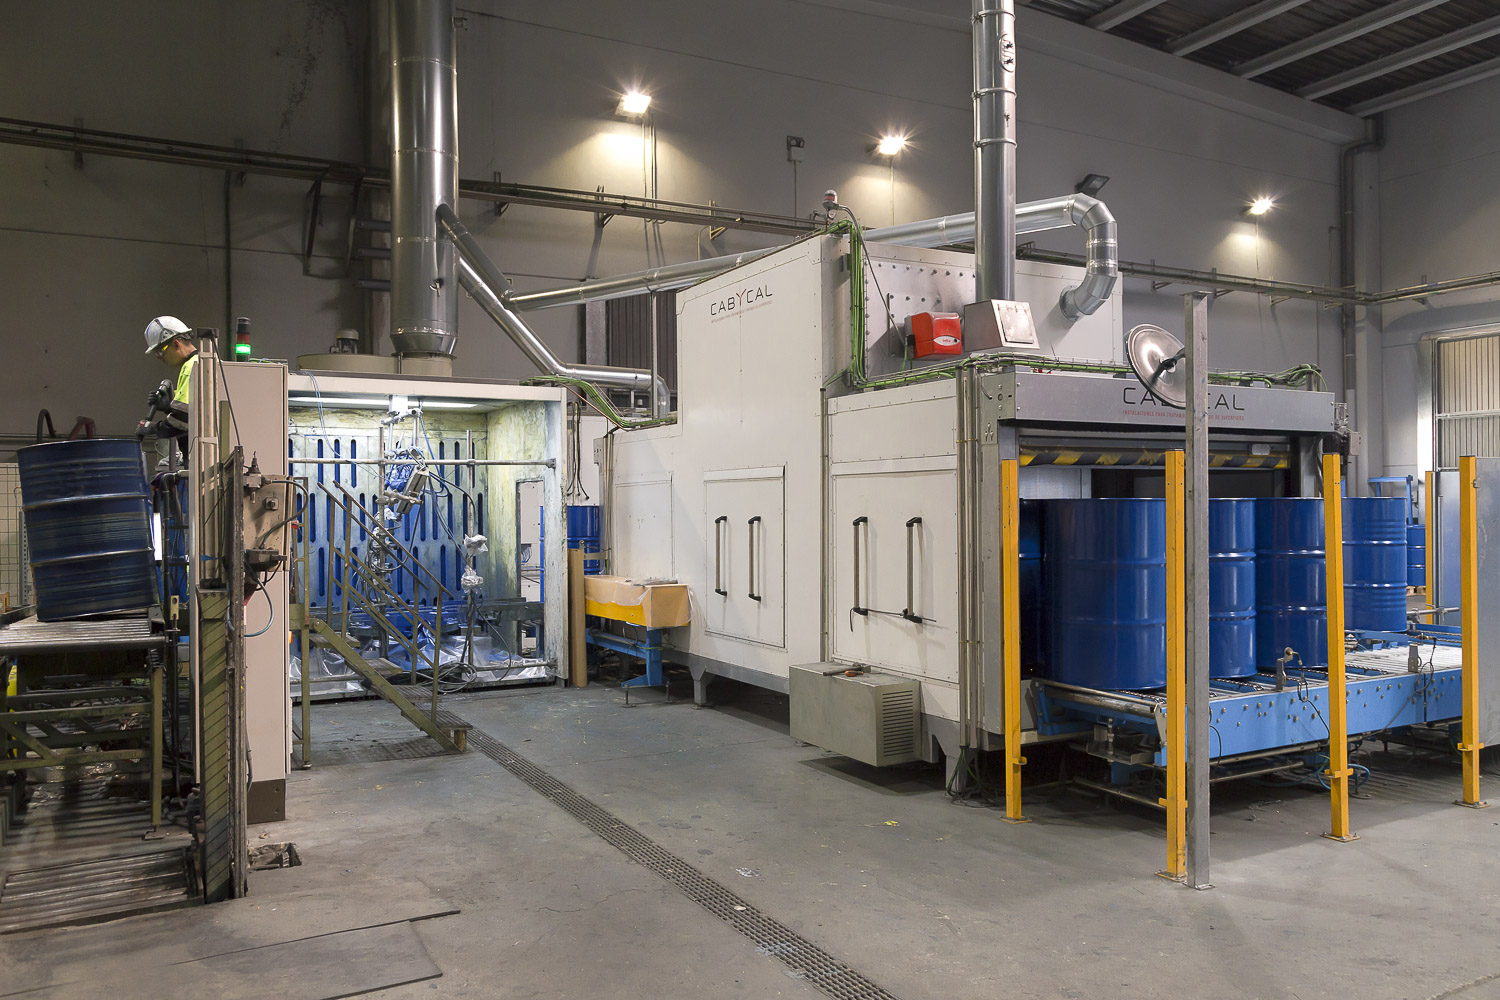 Cabycal provides an automatic liquid painting line to Ecobidn